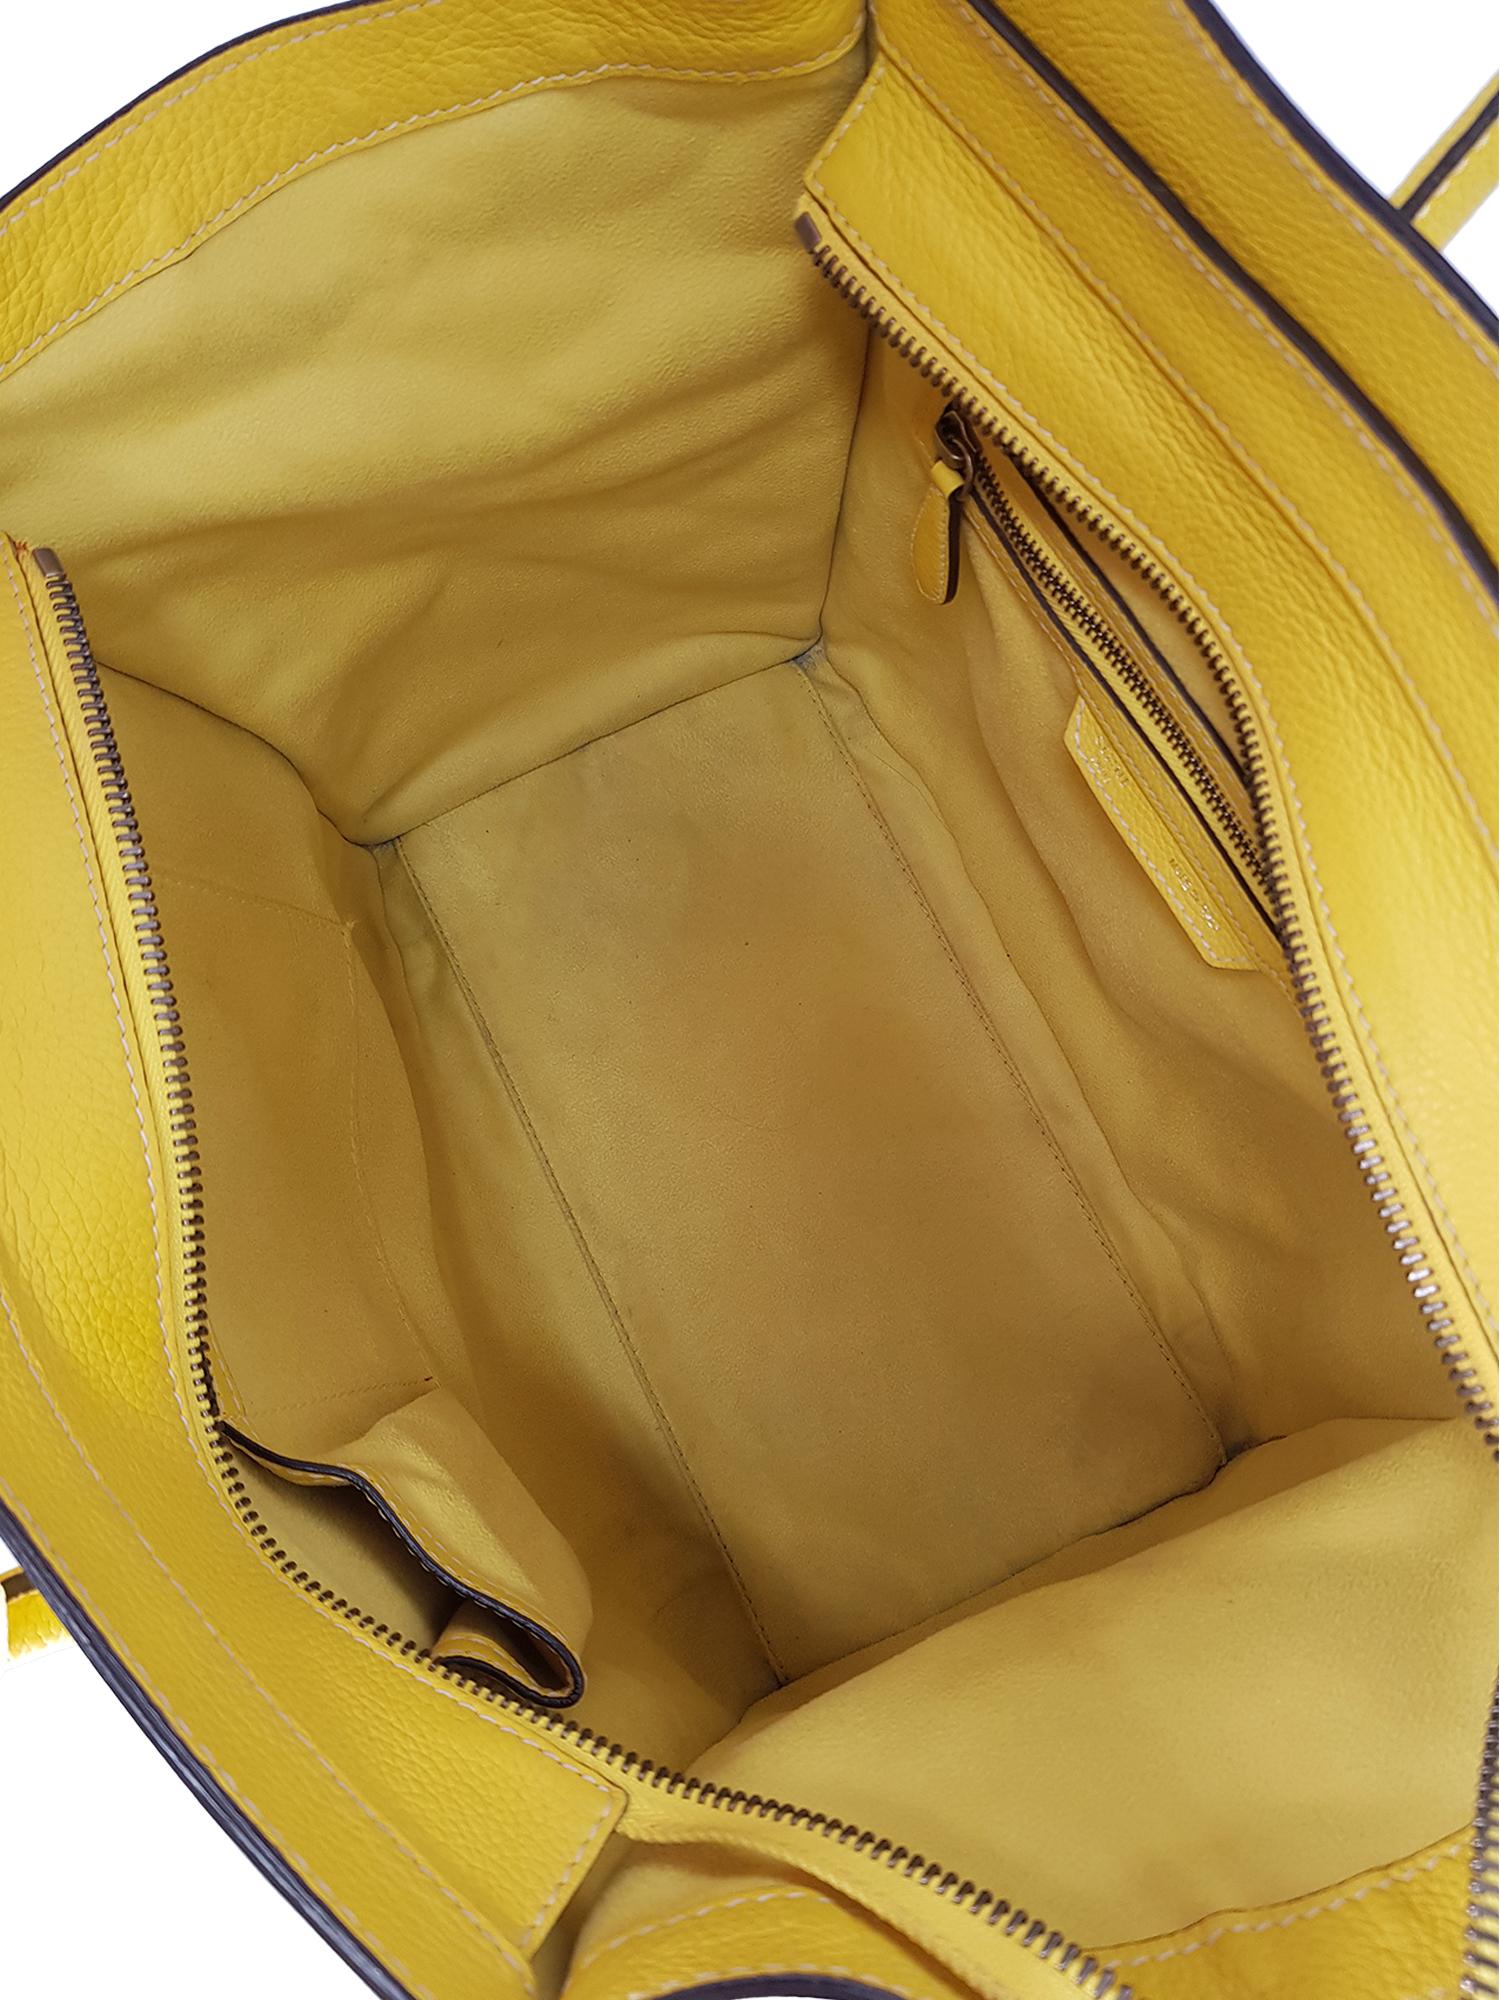 Celine Women's Luggage Yellow Leather In Fair Condition For Sale In Milan, IT